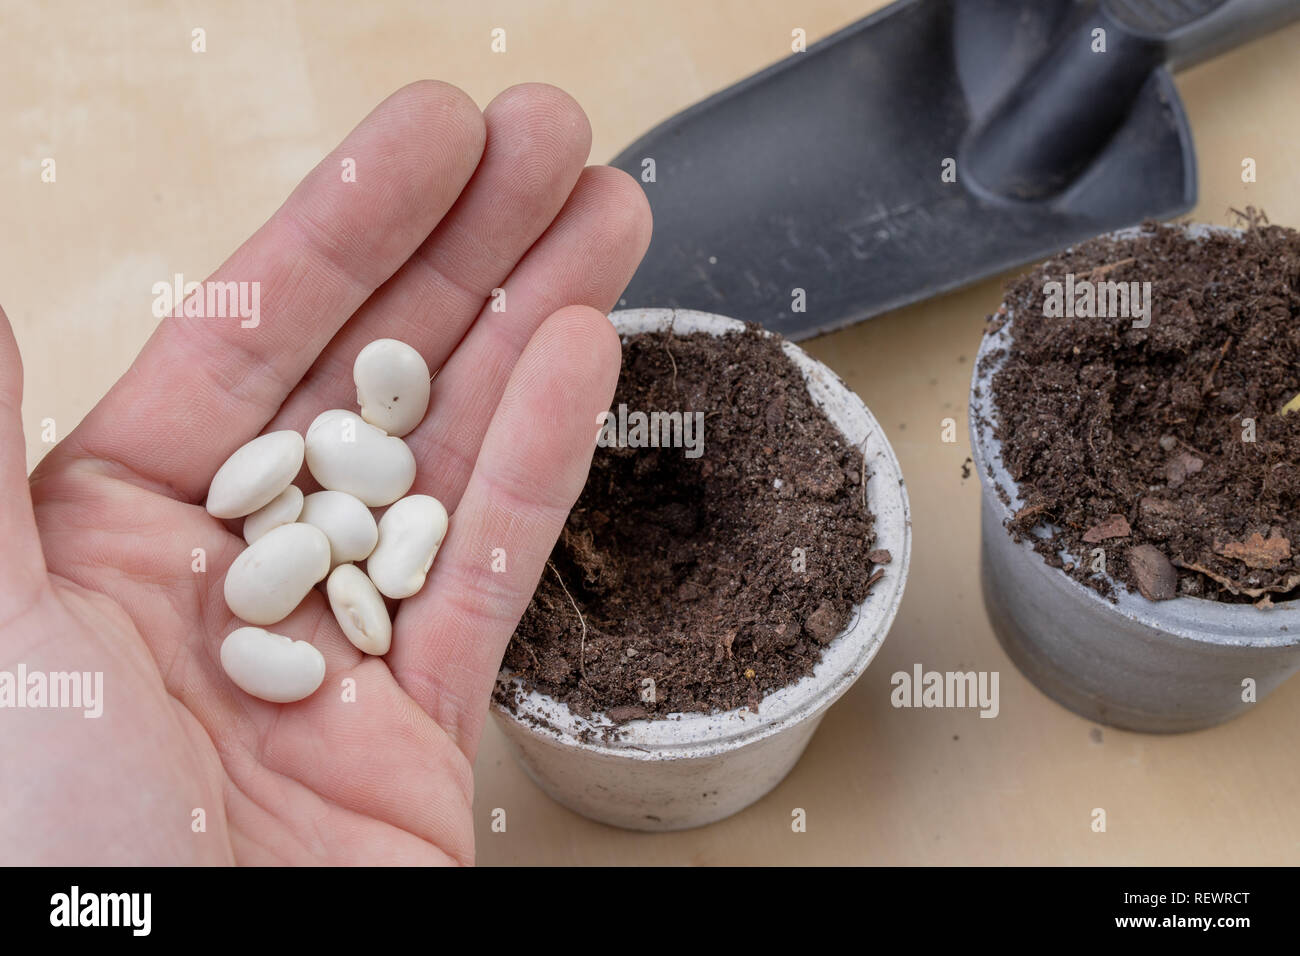 Planting of beans in small pots. Gardening work in home conditions. Light background. Stock Photo